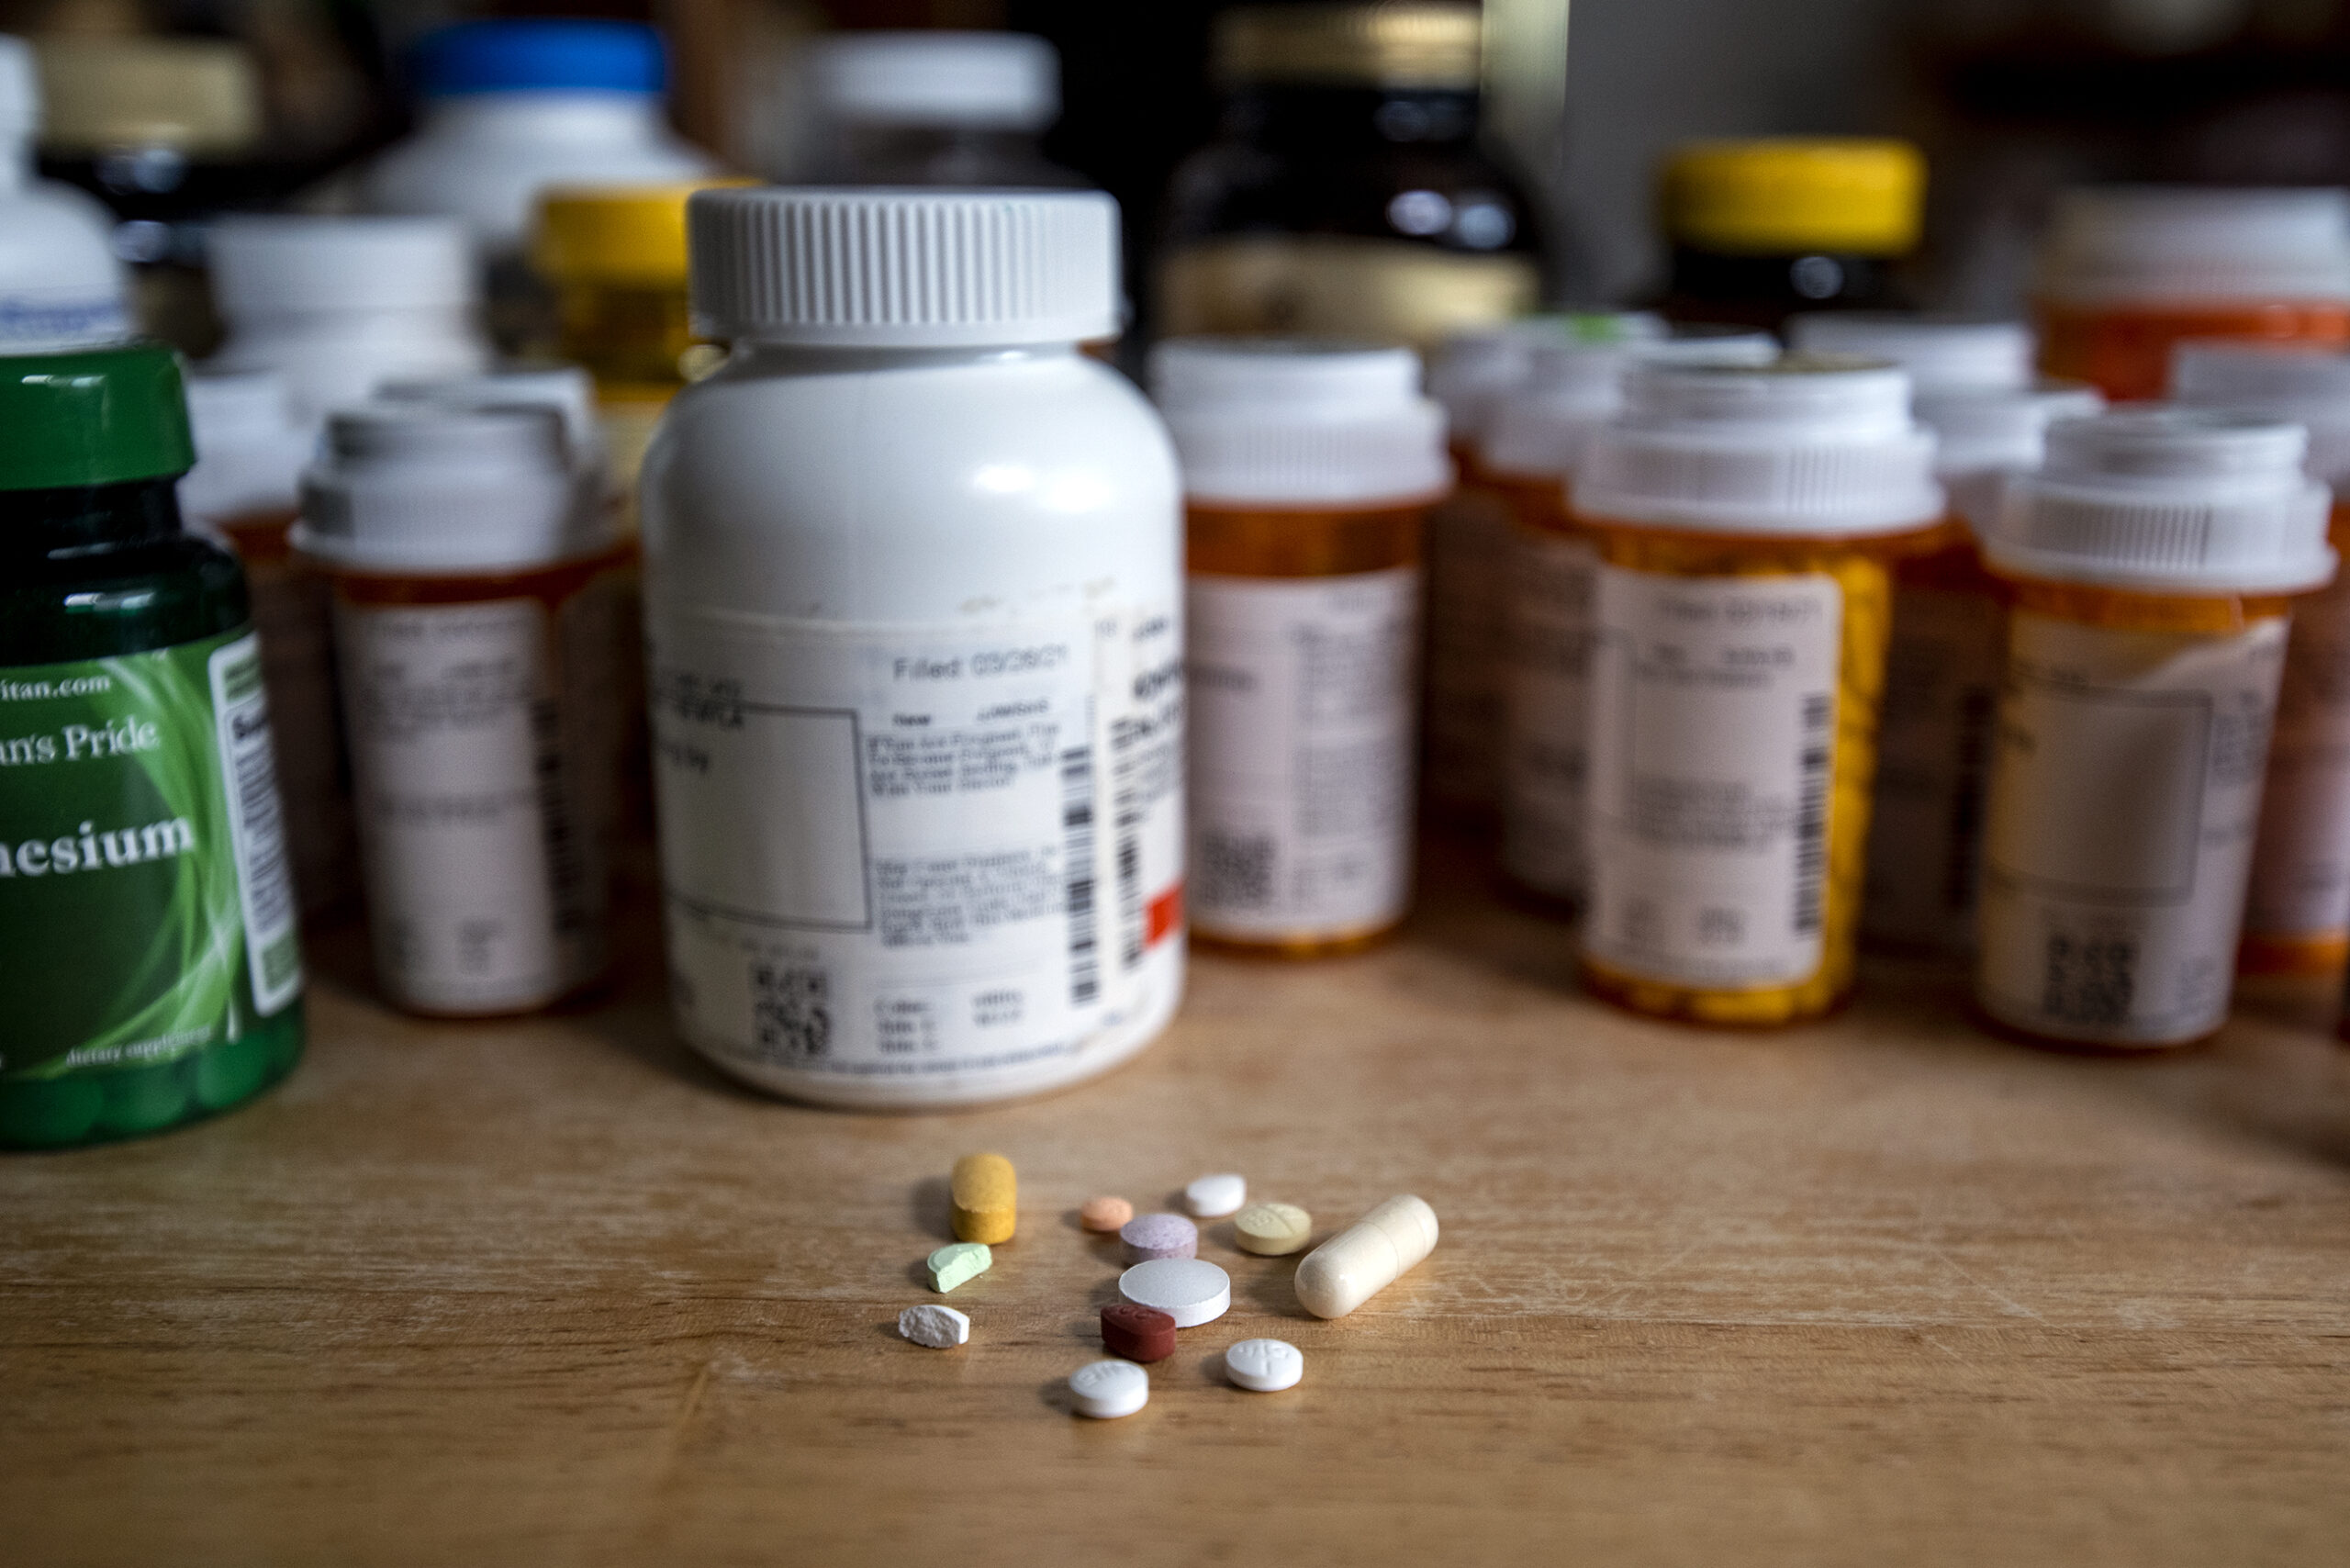 Different kinds of pills sit on a surface in front of pill bottles.